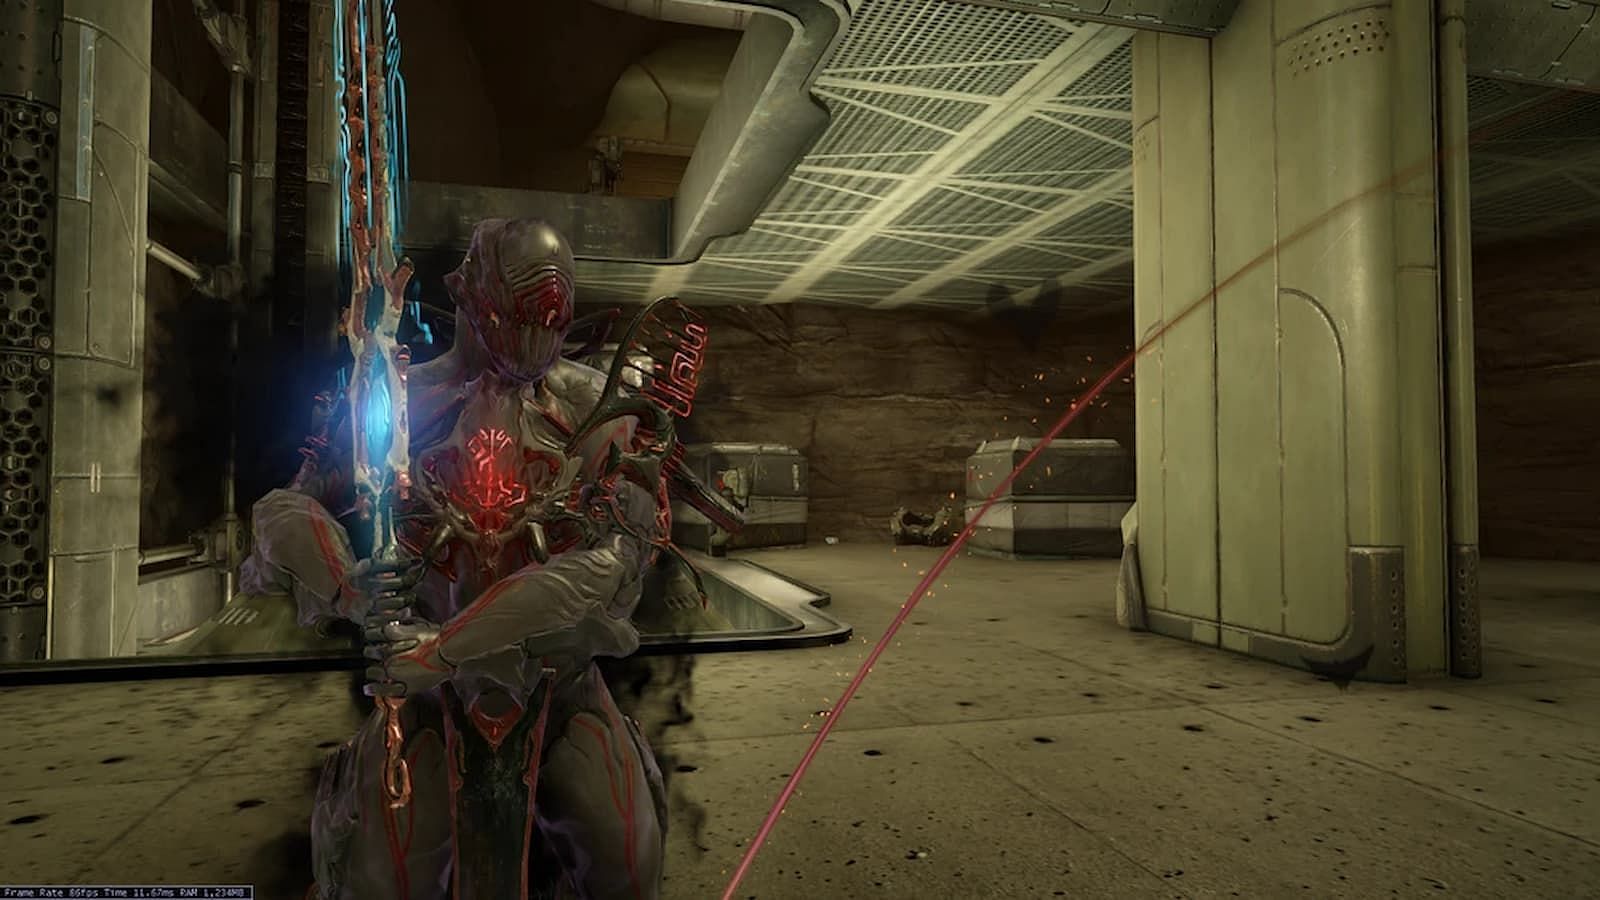 Is Stalker mode finally coming with Warframe Jade Shadows update? (Image via Digital Extremes)